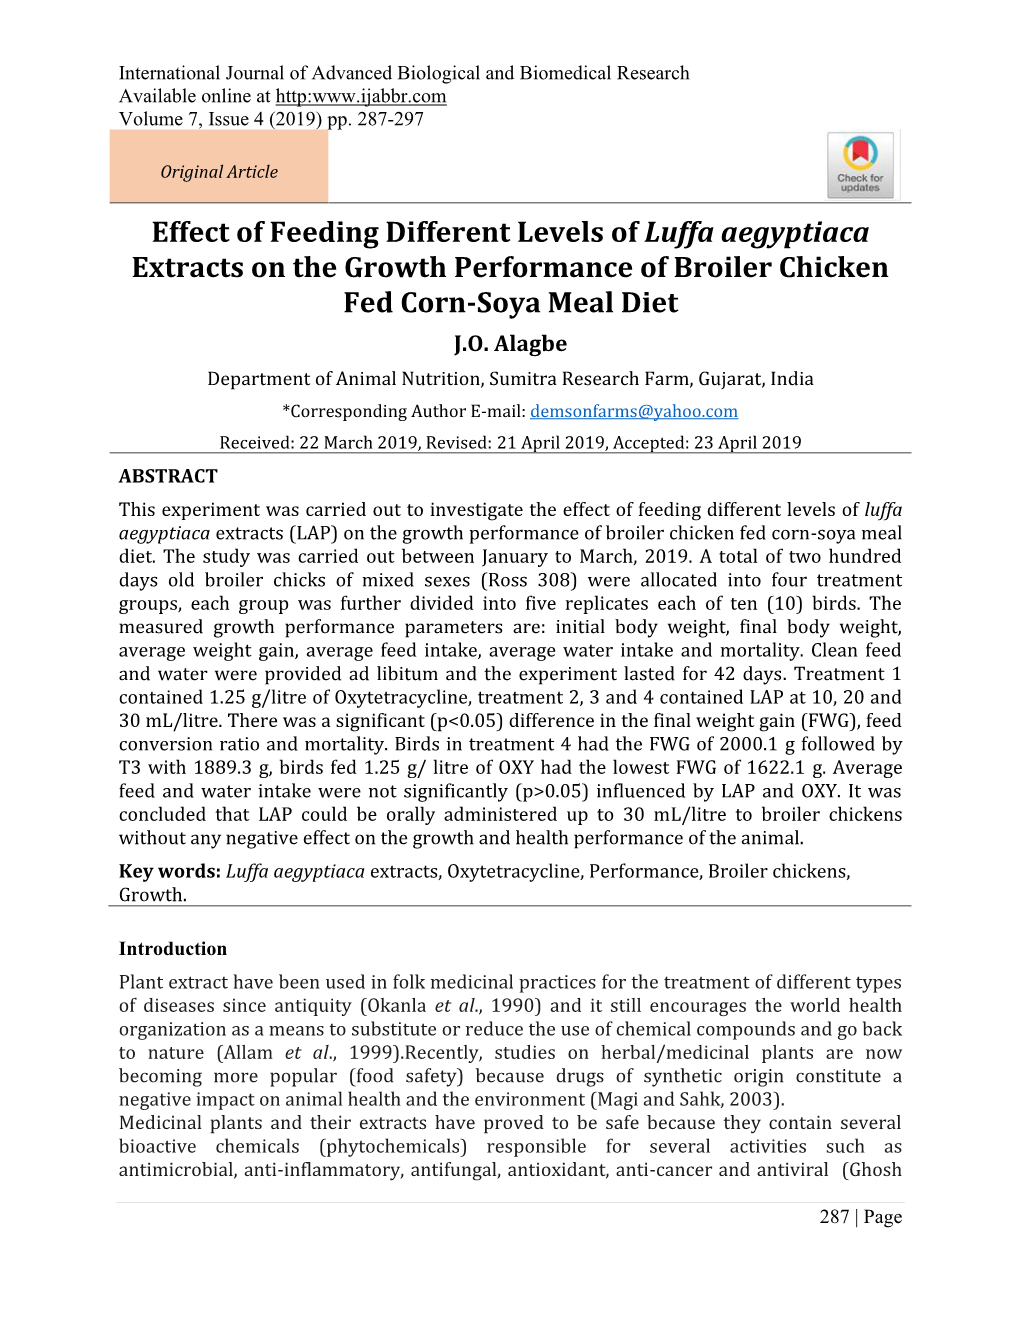 Effect of Feeding Different Levels of Luffa Aegyptiaca Extracts on the Growth Performance of Broiler Chicken Fed Corn-Soya Meal Diet J.O